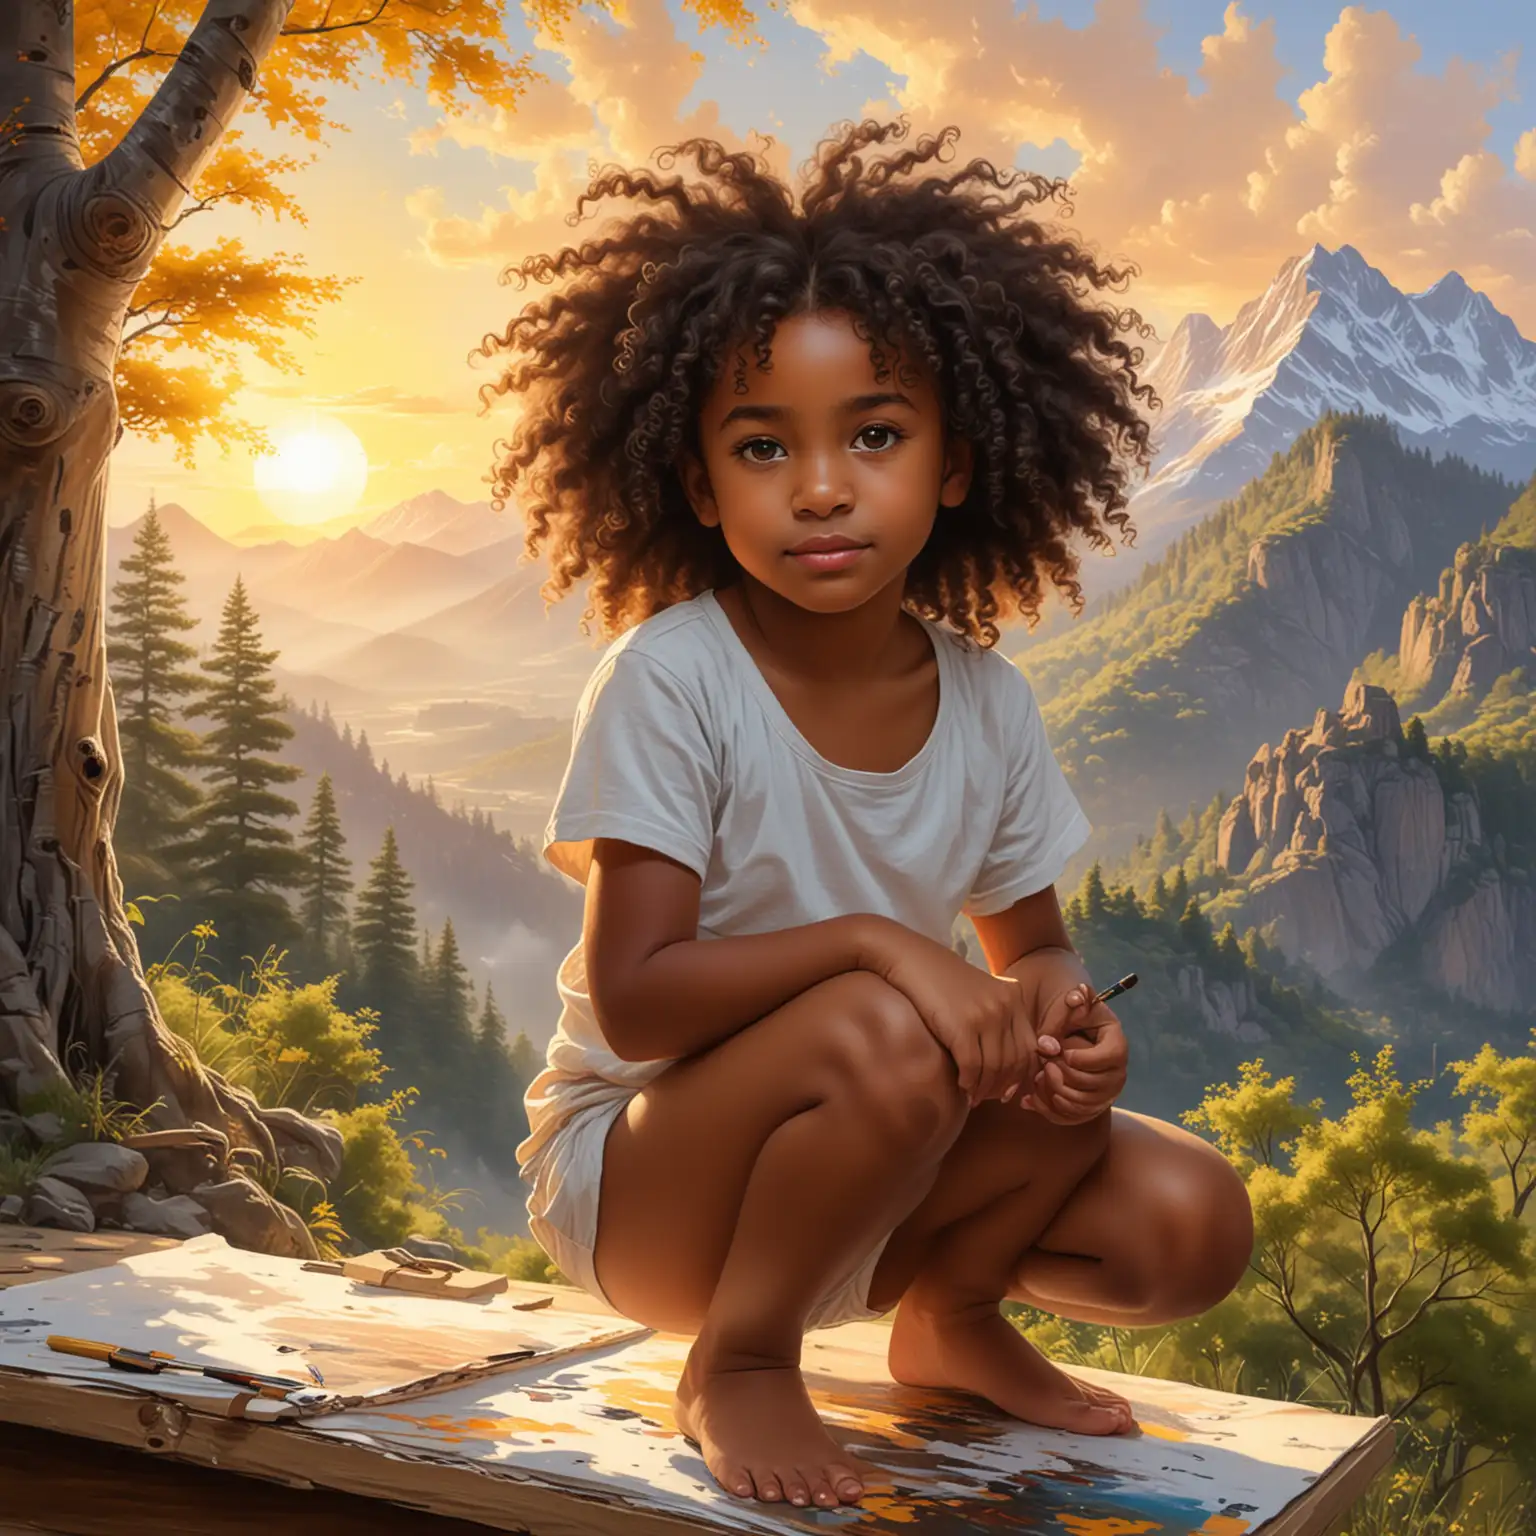 Cute Black Girl with Curly Natural Hair in Scenic Nature